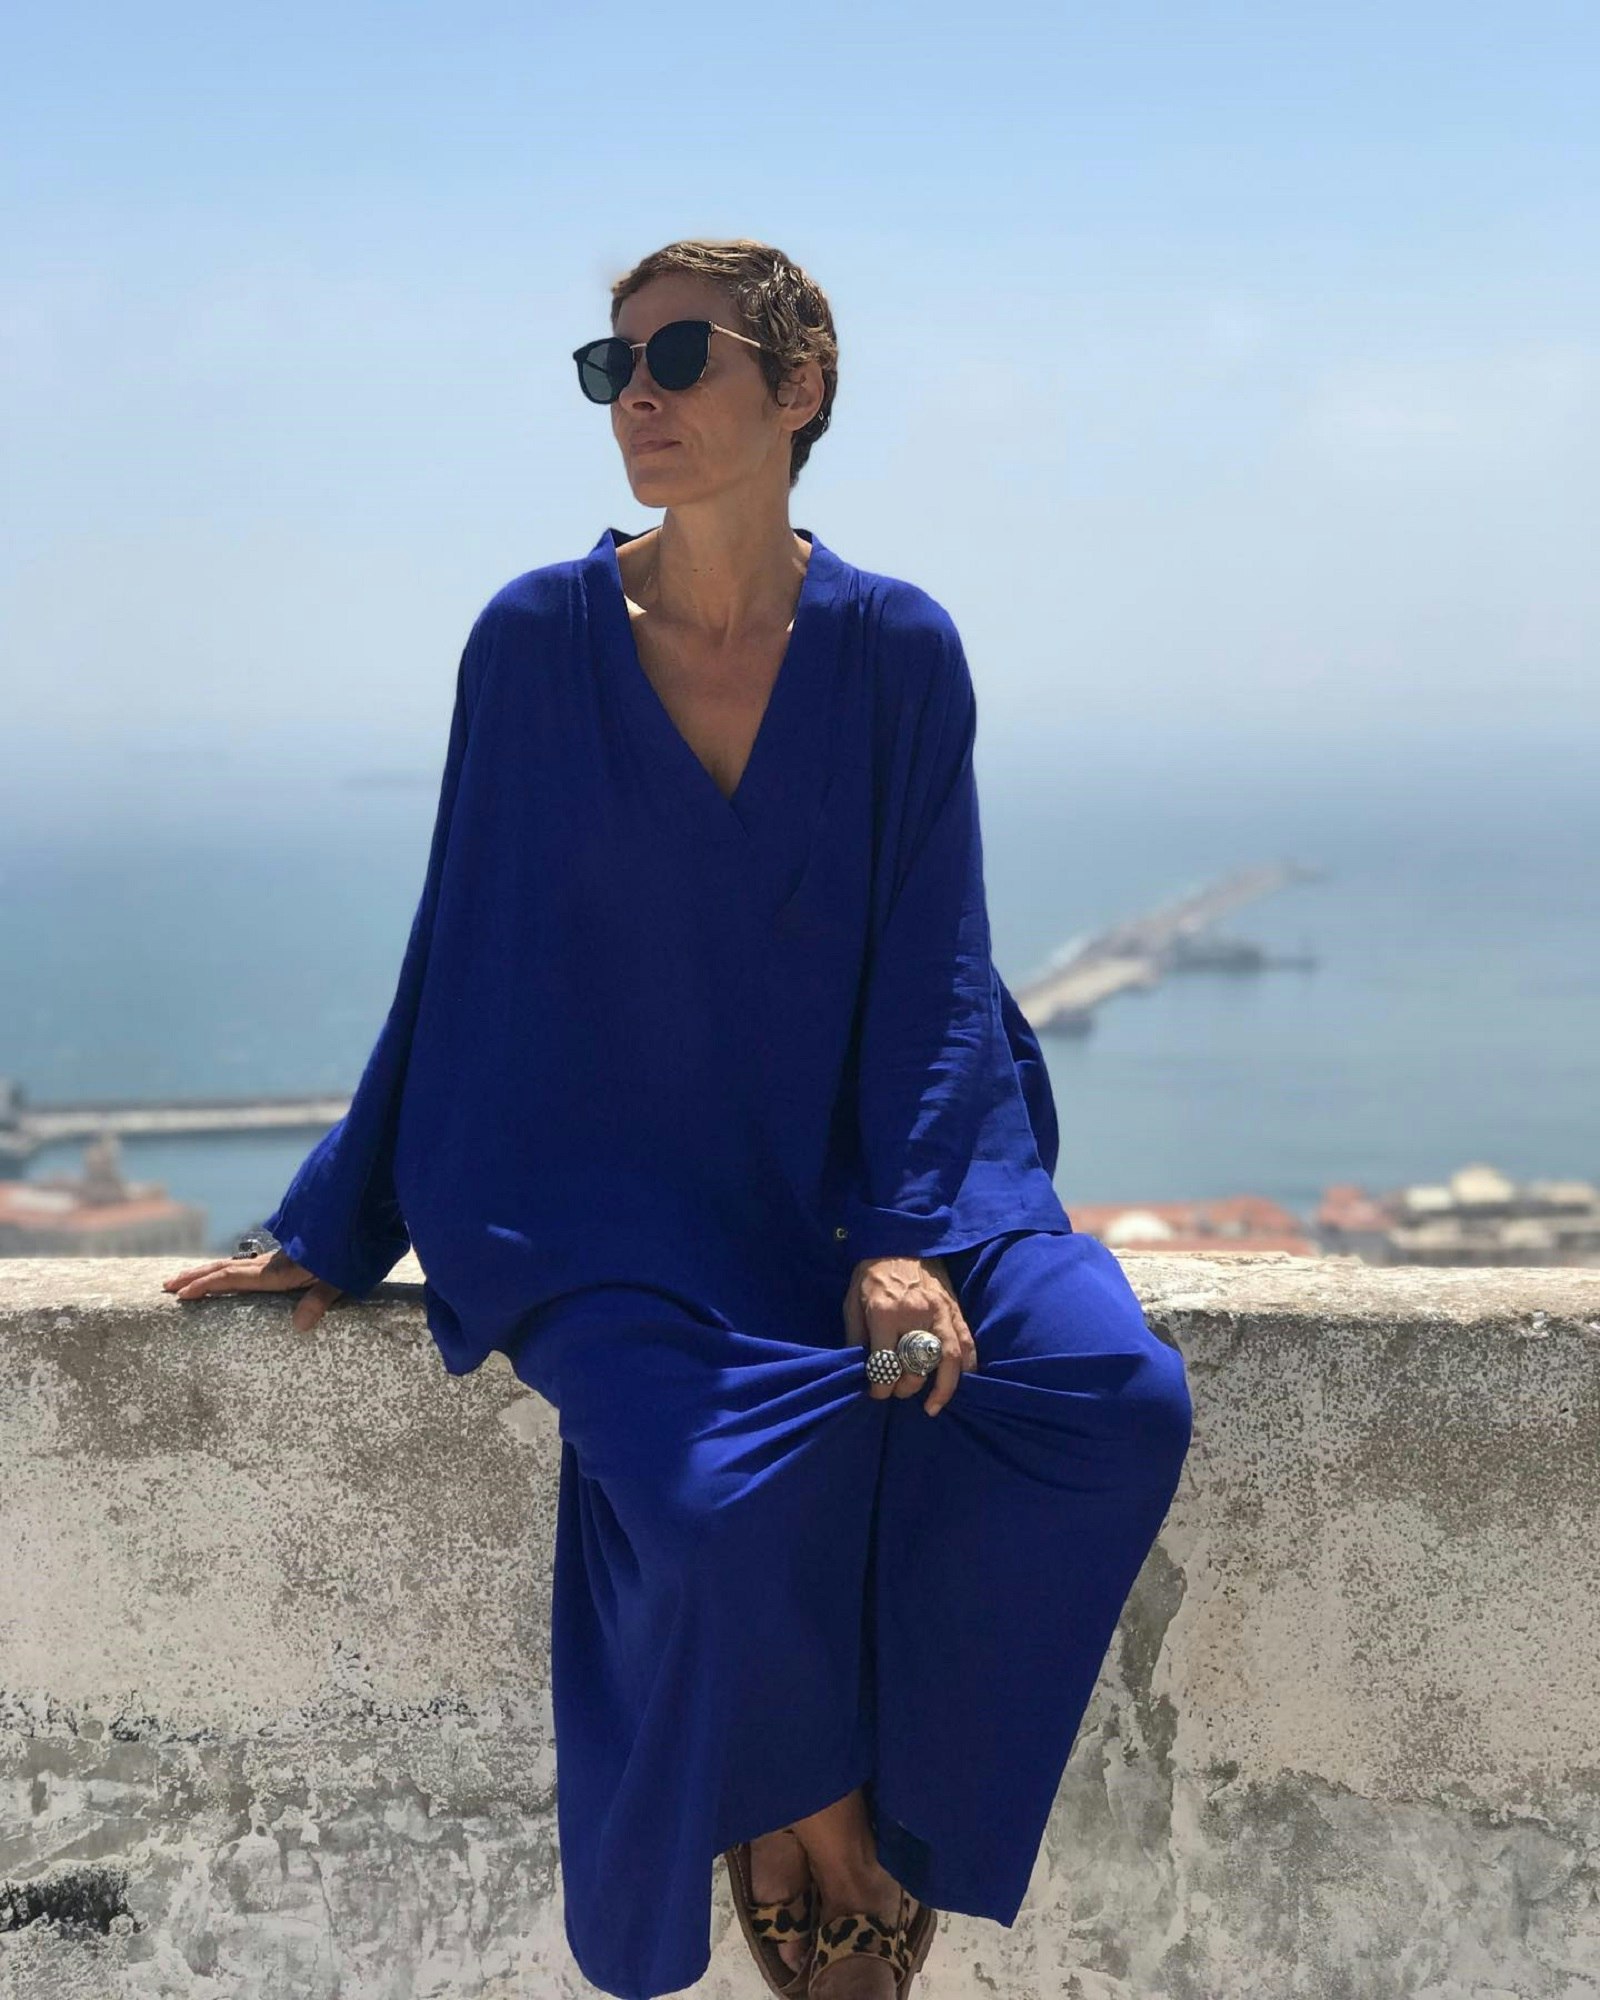 Fashion designer Norya sits atop a wall in a long blue dress, wearing sunglasses, large silver rings and leopard-print sandals. In the background is the sea in the distance.